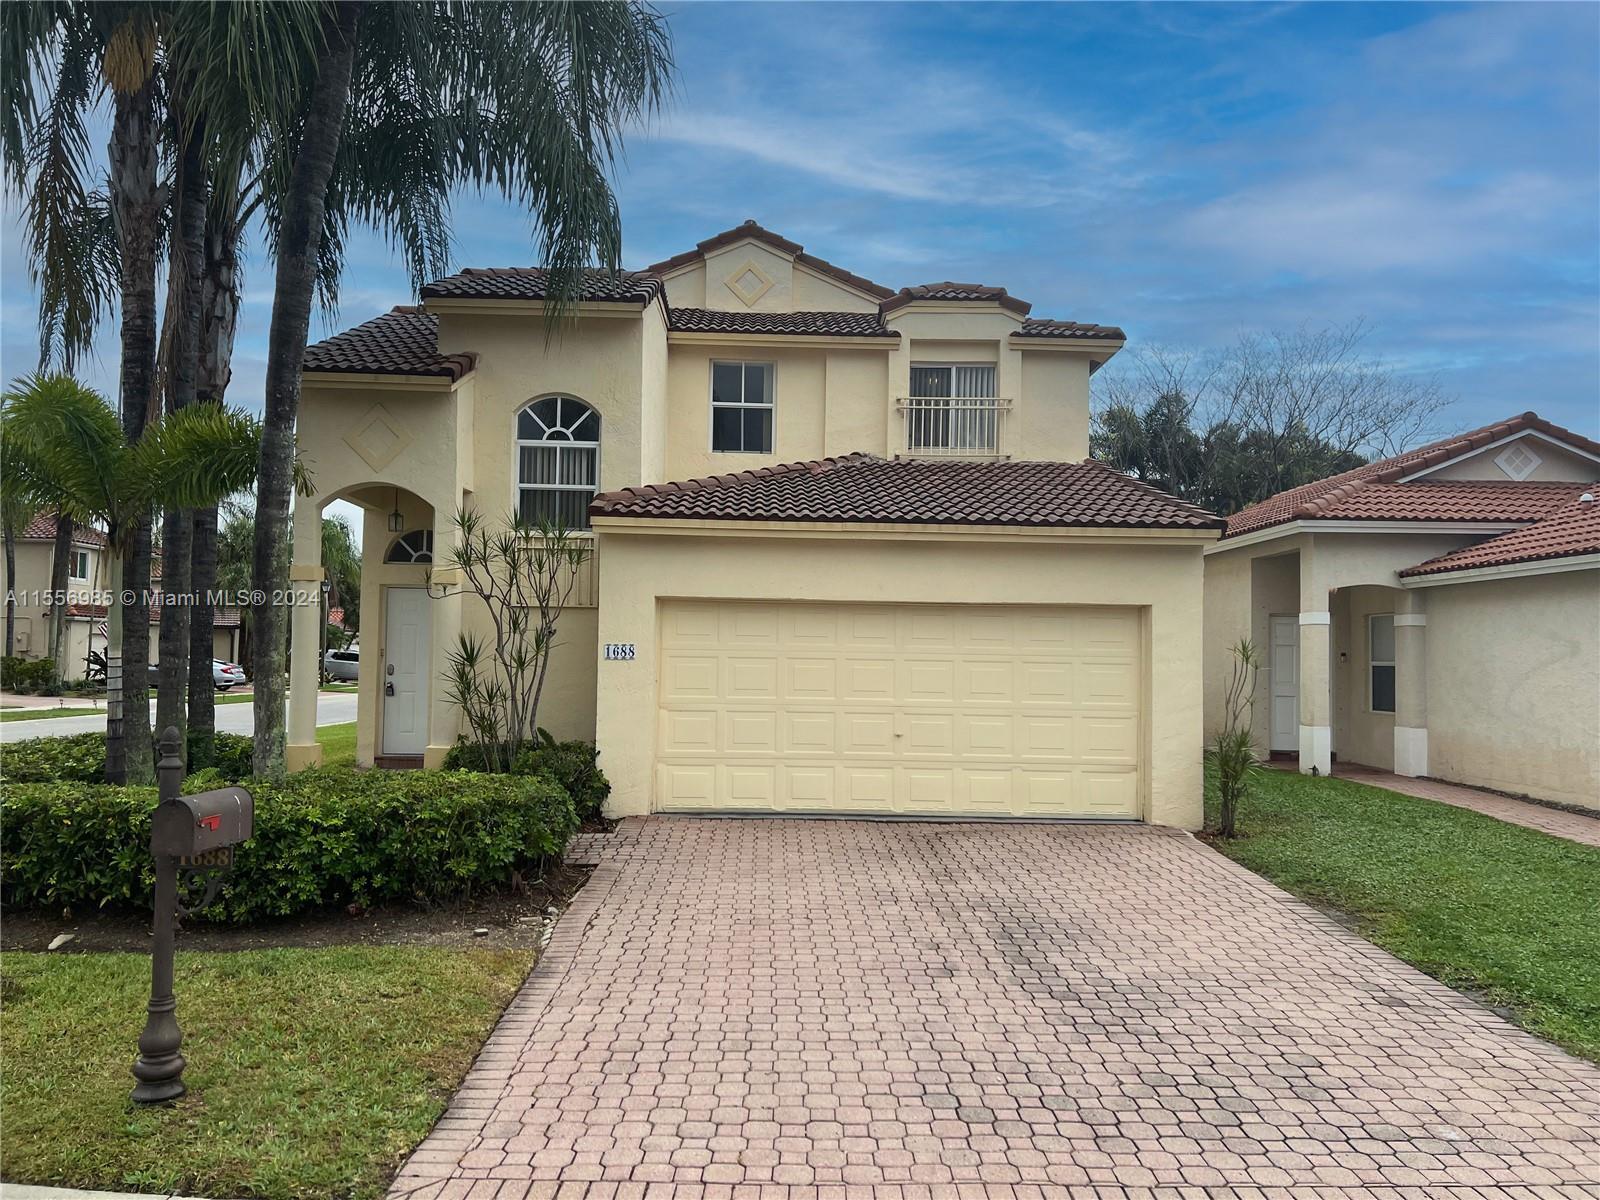 Photo of 1688 SW 158th Ave in Pembroke Pines, FL